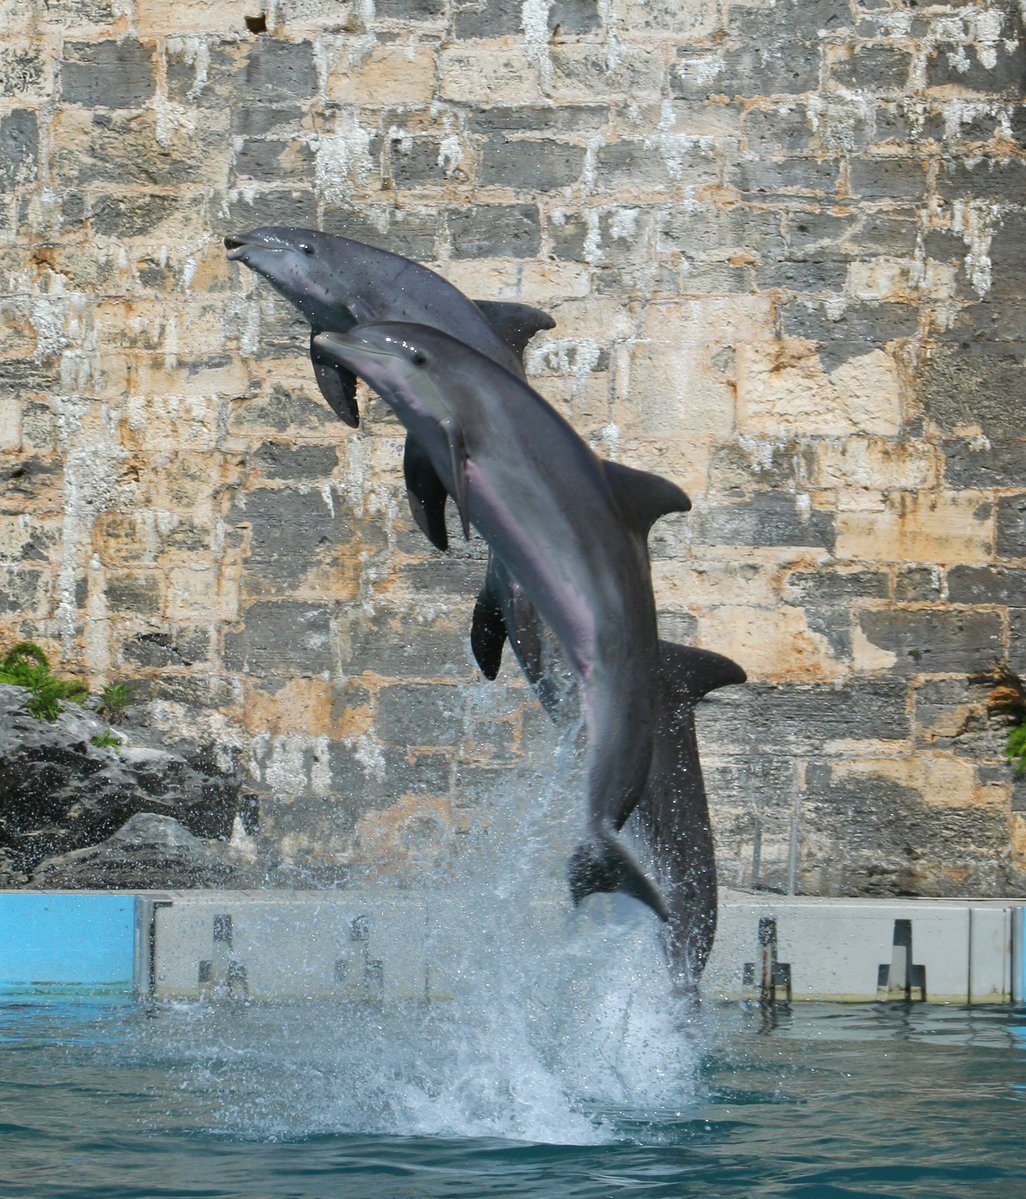 two dolphins jump into the water while playing